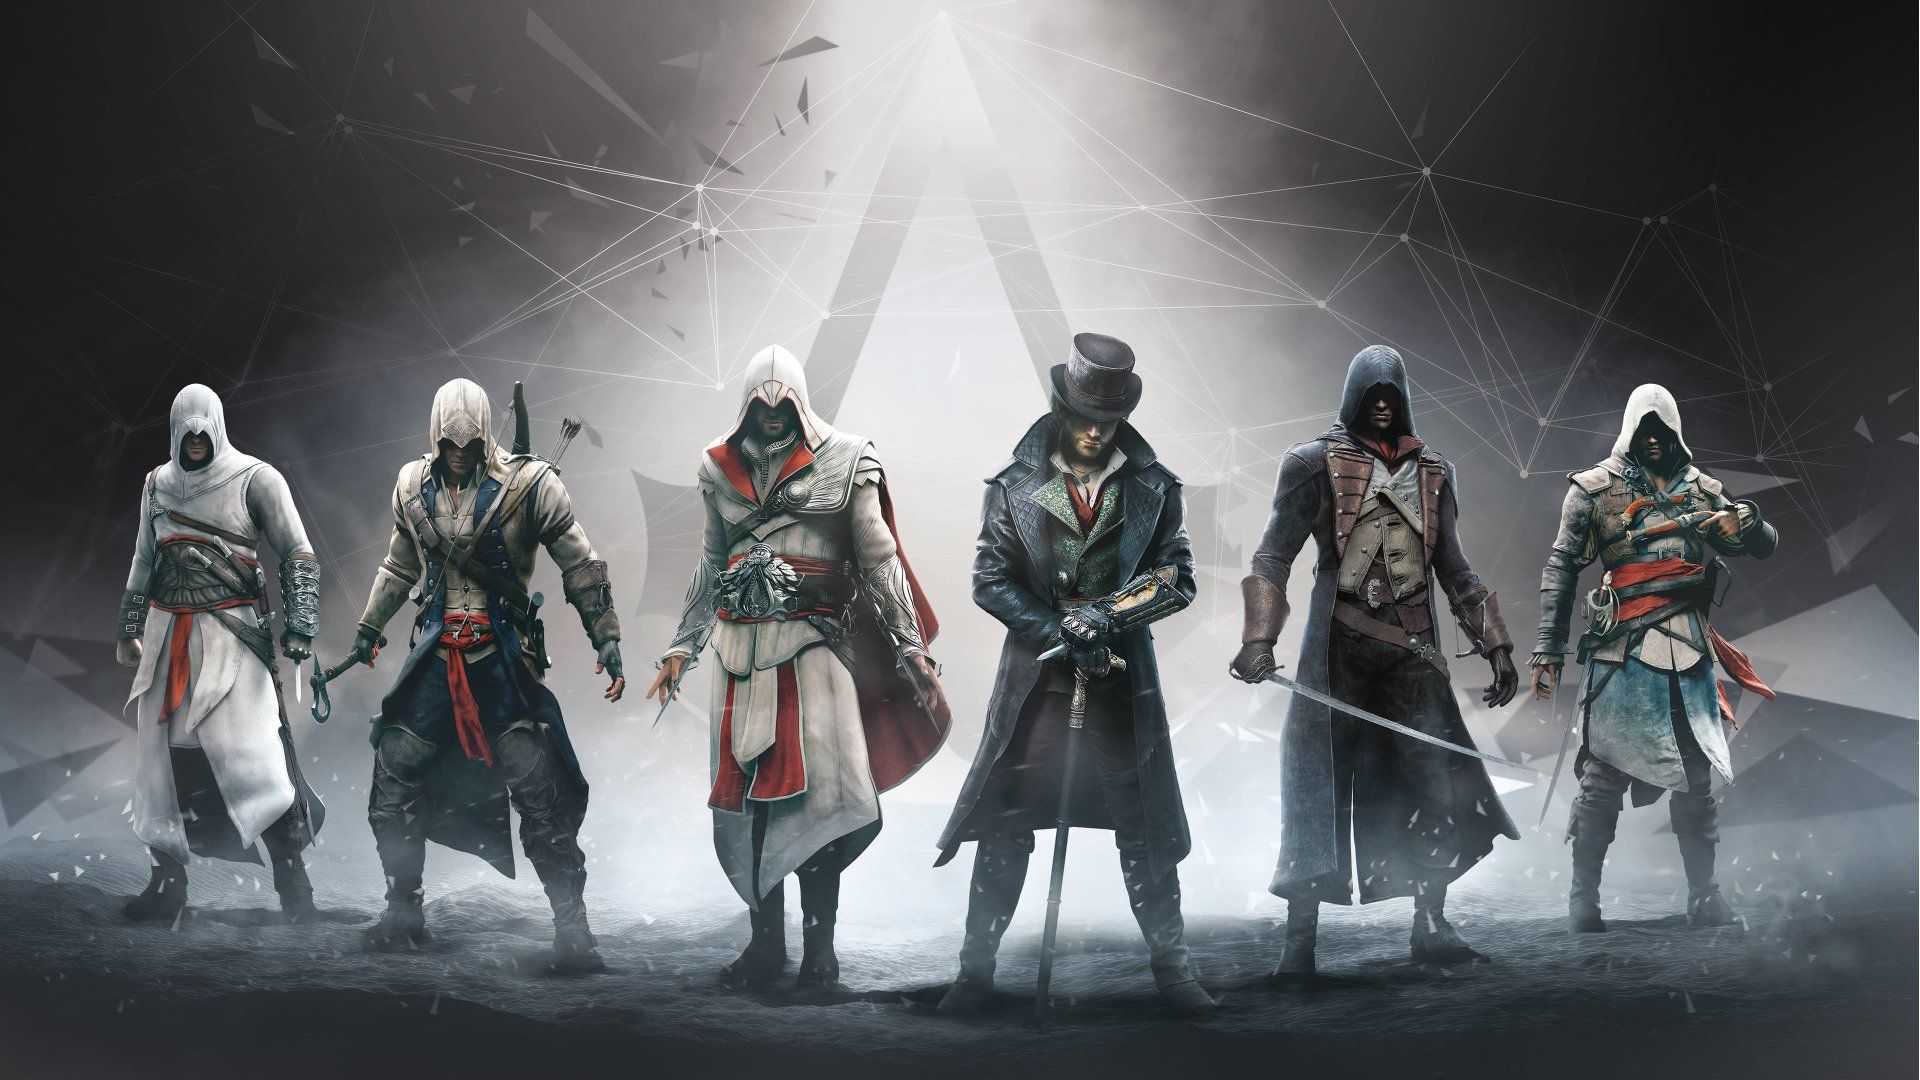 4K Ultra HD Assassin's Creed Wallpaper and Background Image